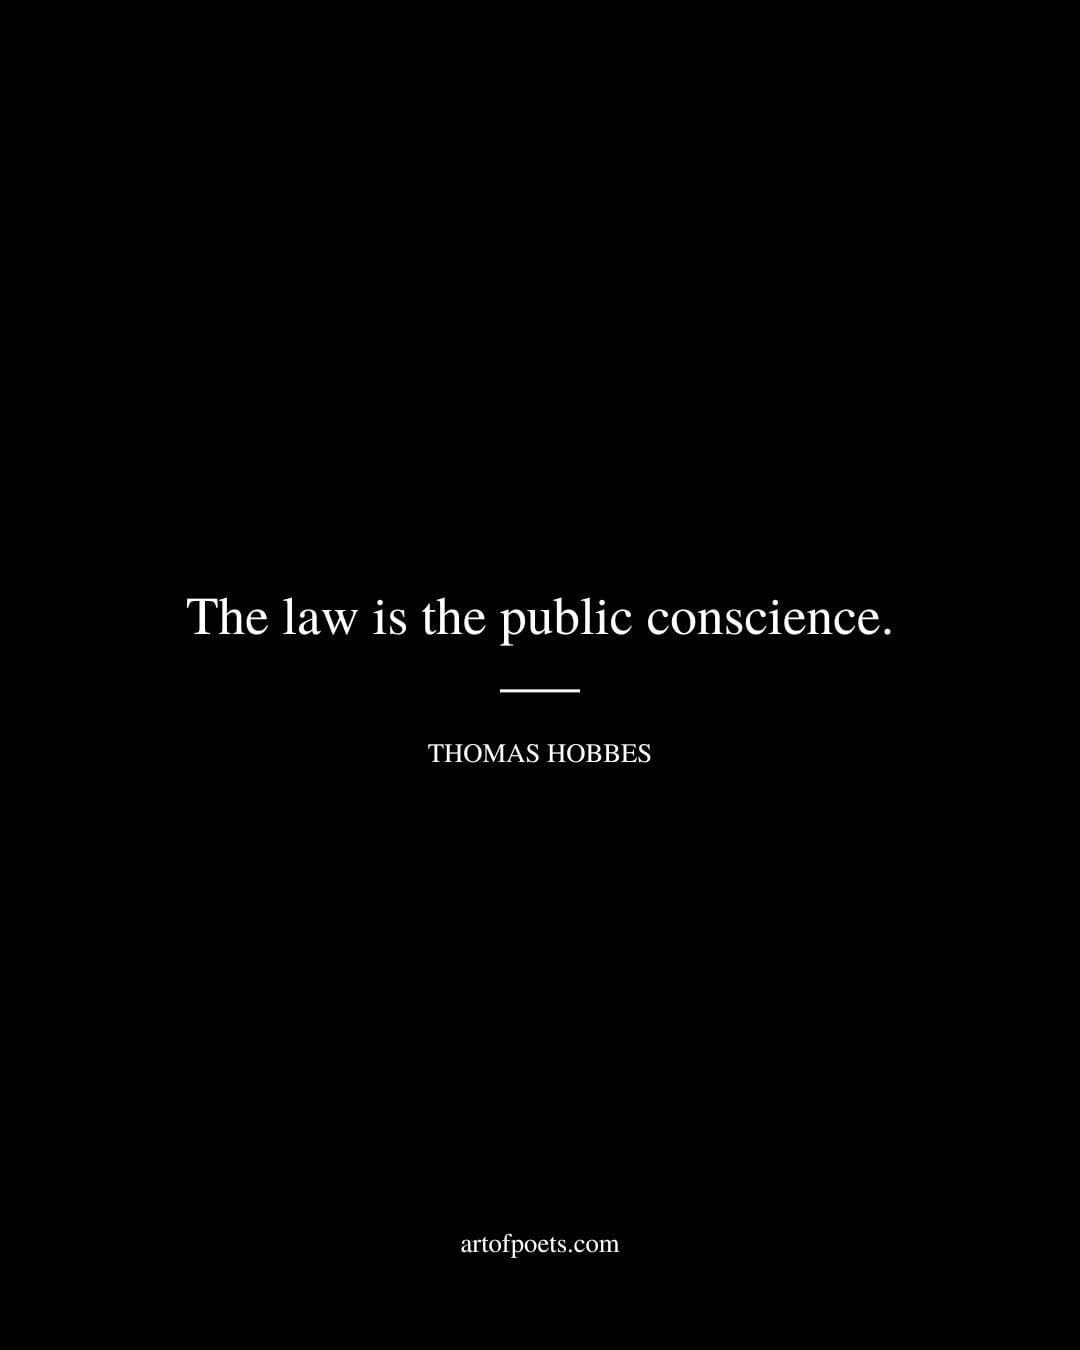 The law is the public conscience